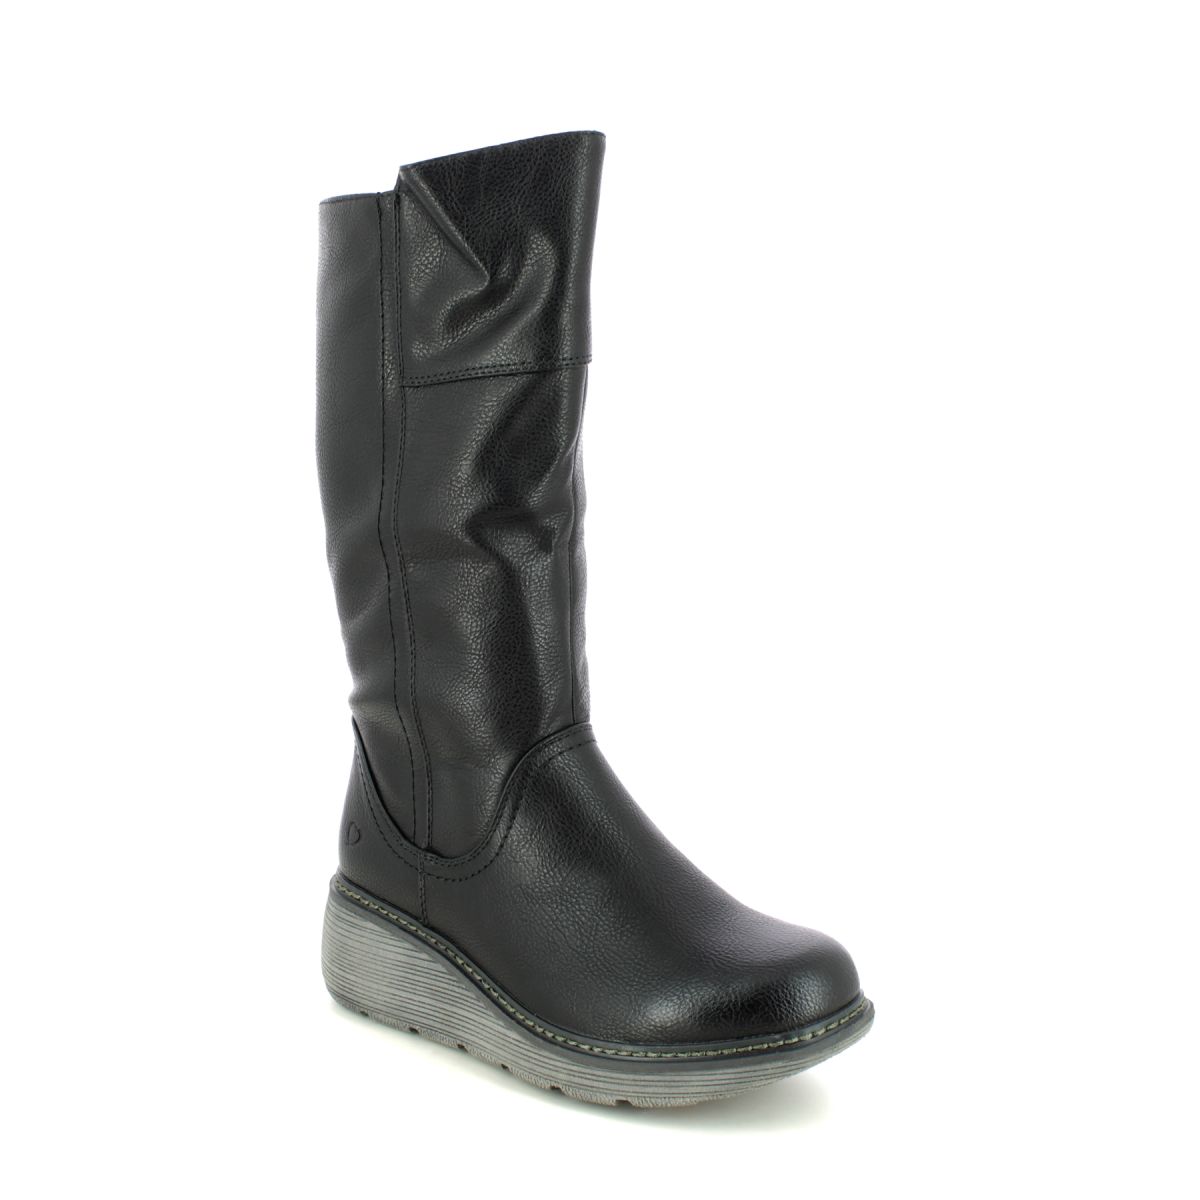 Heavenly Feet Lombardy Wedge Black Womens Mid Calf Boots 3005-34 In Size 8 In Plain Black